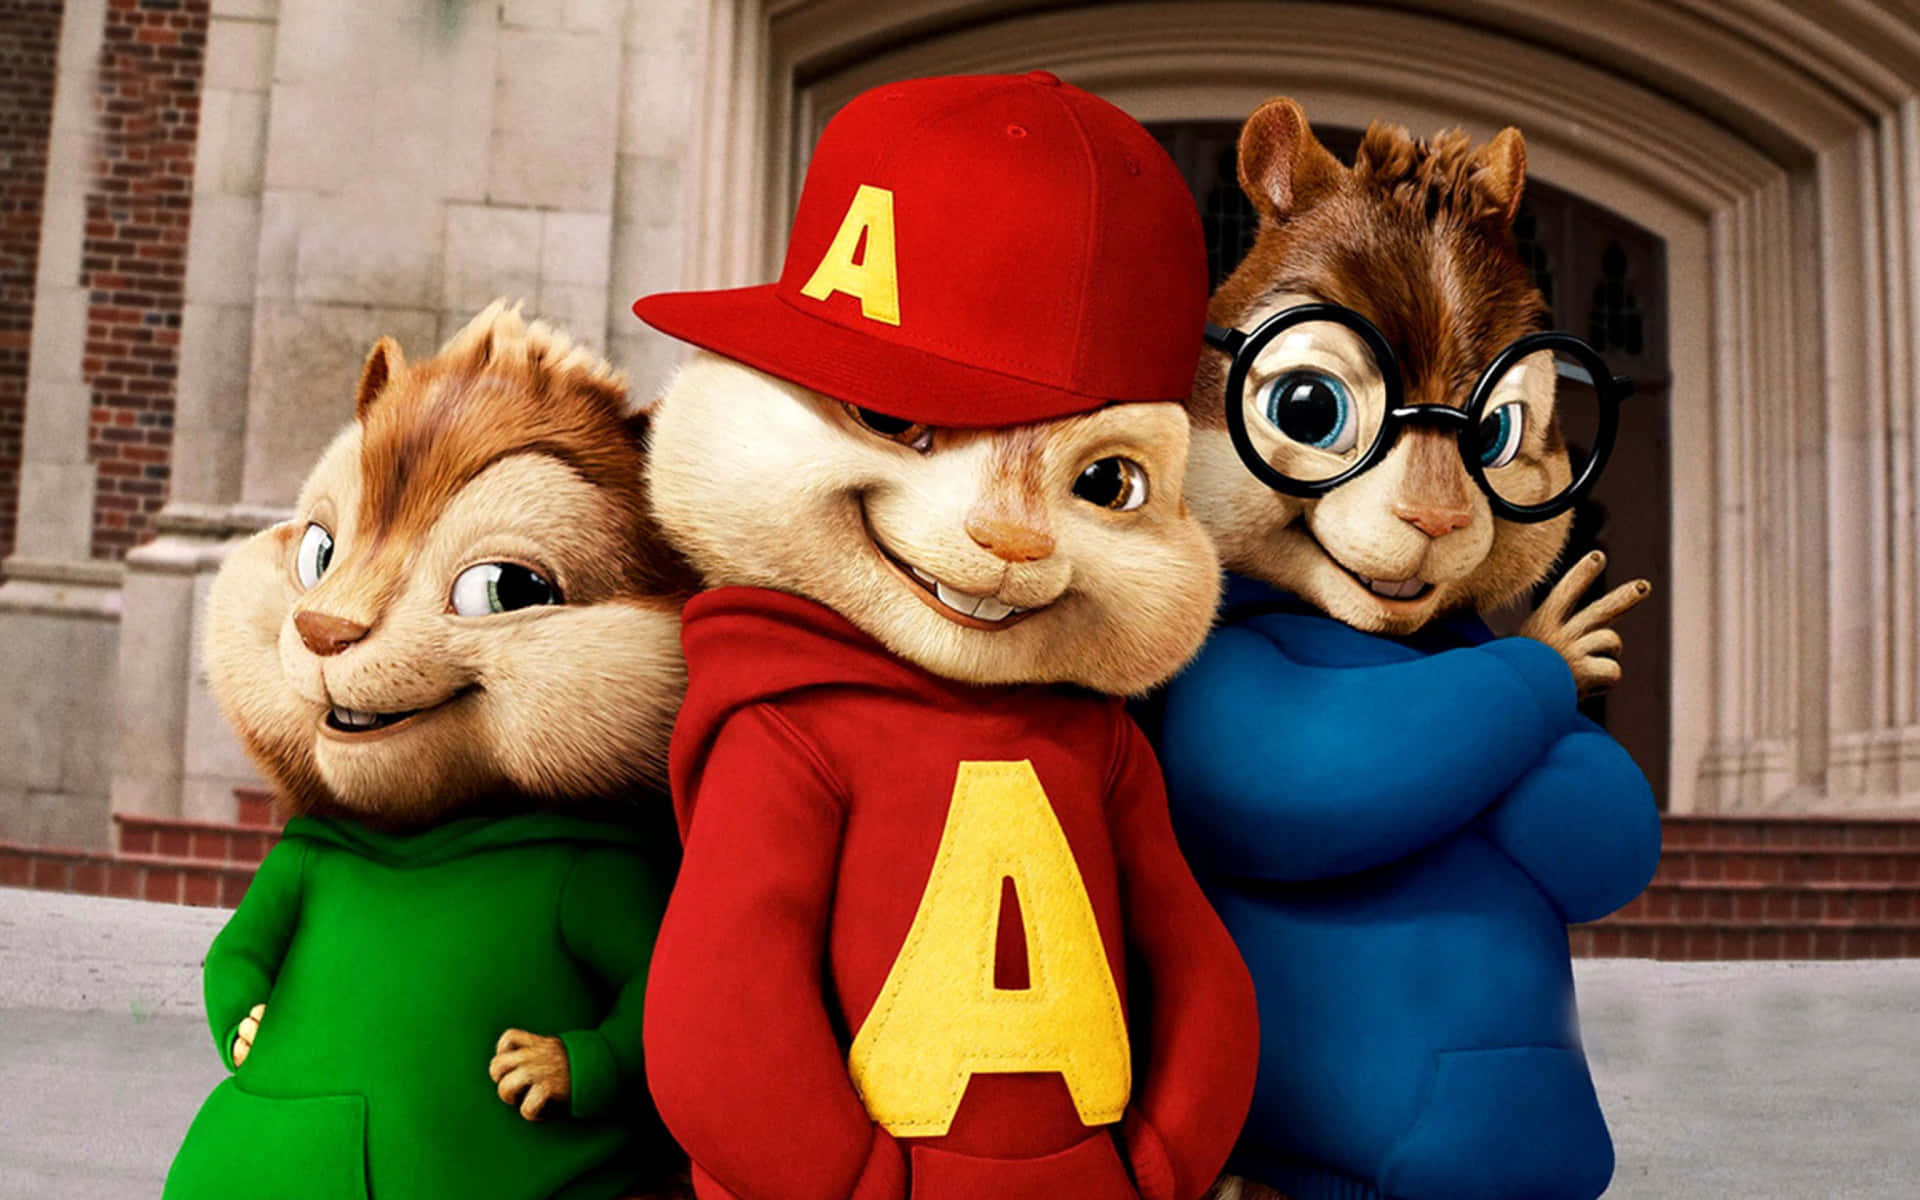 Join Alvin, Simon&Theodore on a fun and musical adventure!